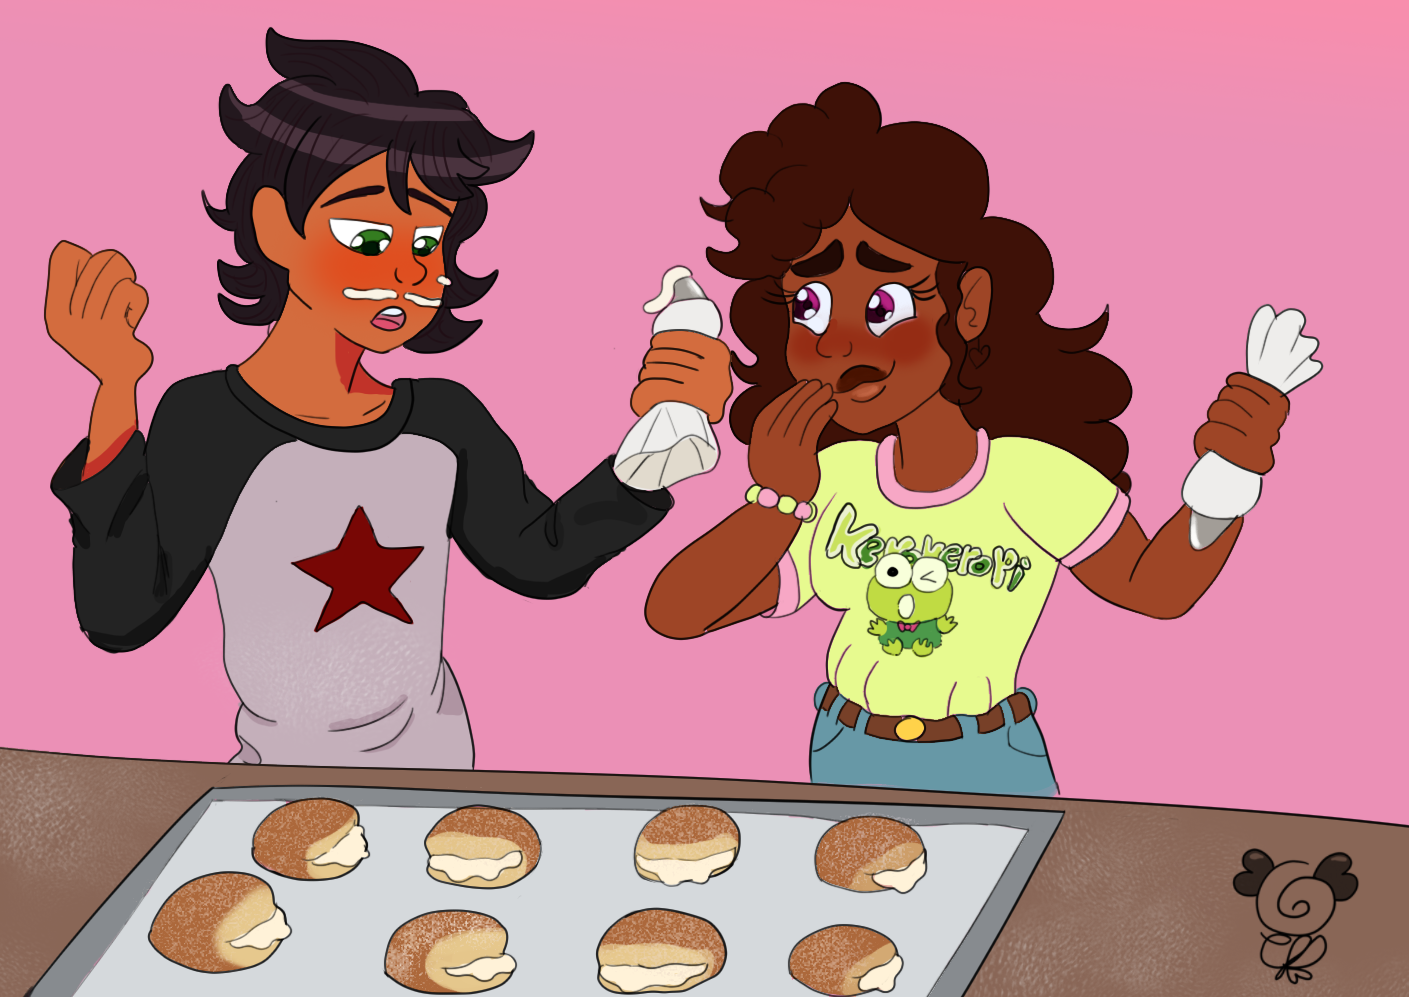 Mstoony's OCs, Remy and Caspian making Malasadas togehter without getting flustered by being around each other...